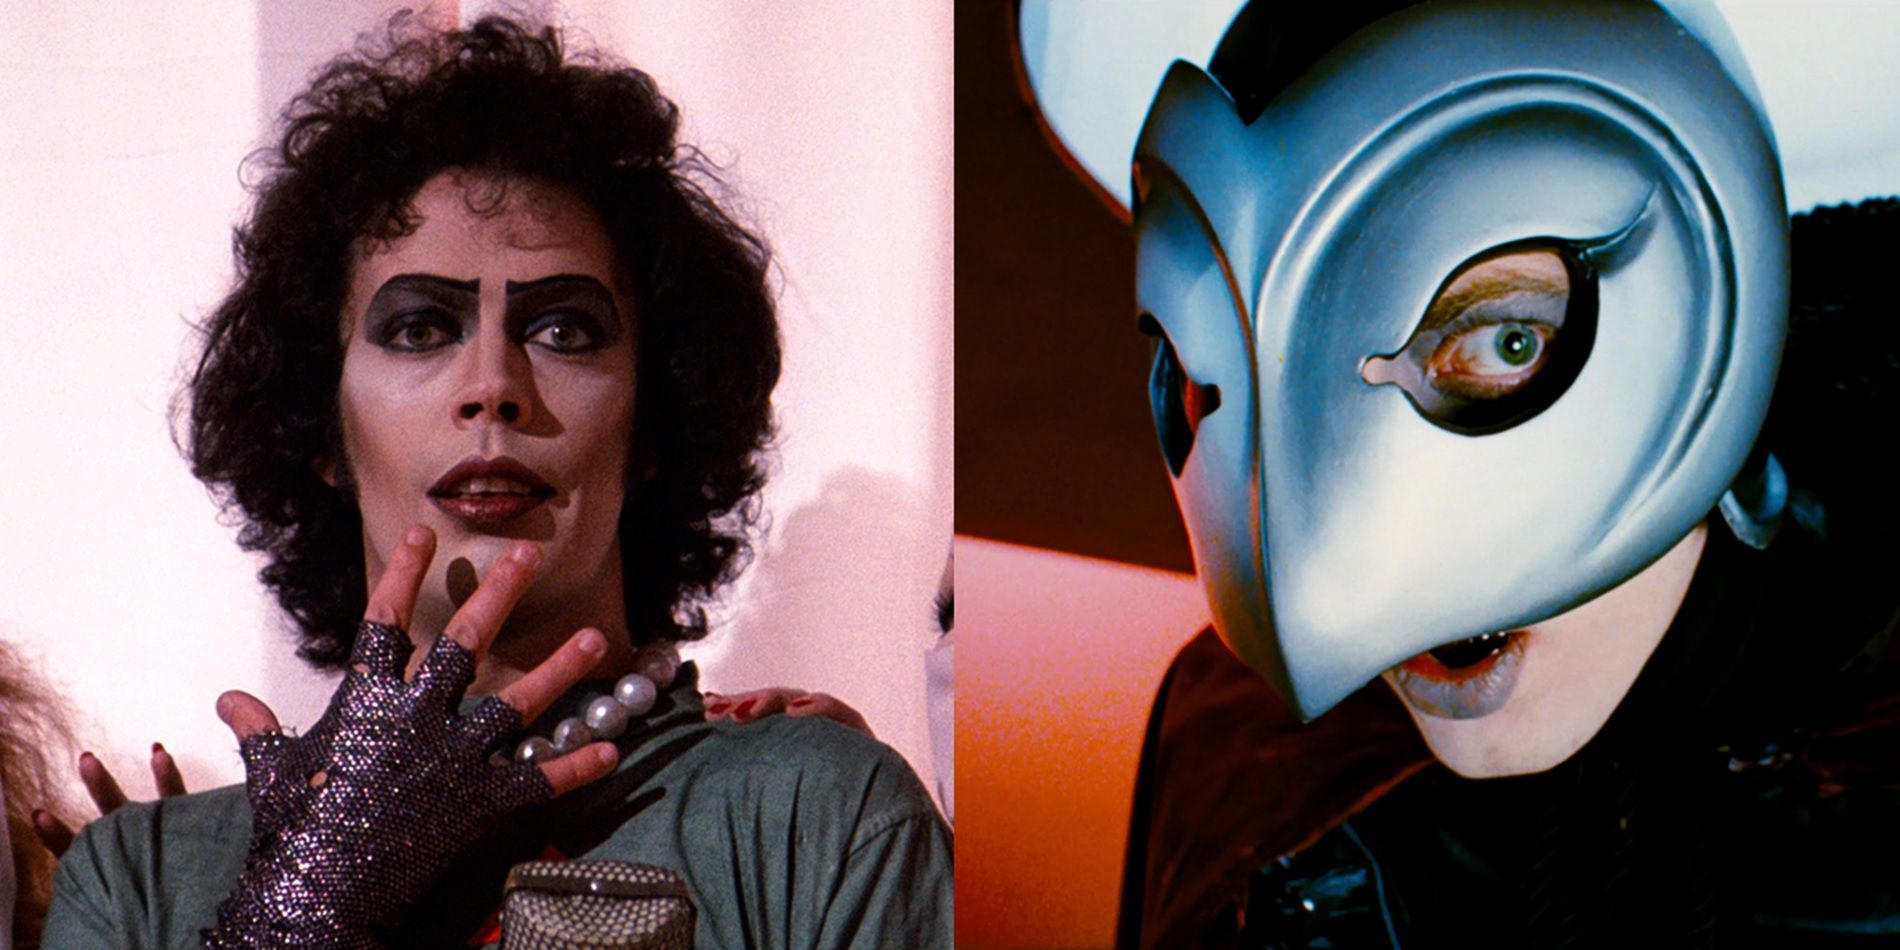 Split_image_of_Frank-N-Furter_in_The_Rocky_Horror_Picture_Show_and_Winslow_in_Phantom_of_the_Paradise